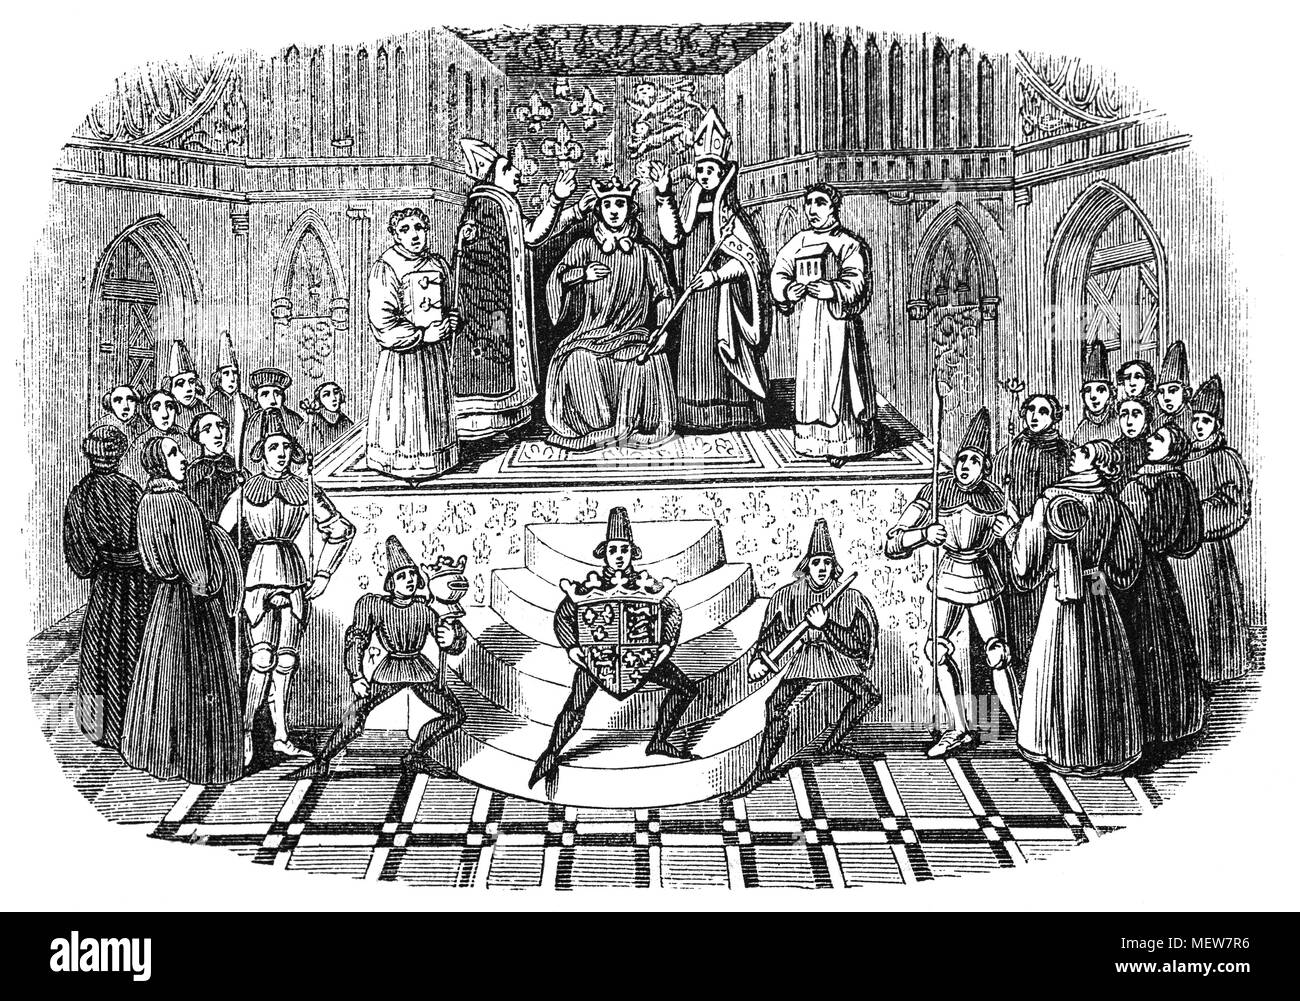 The coronation of Henry IV (1367 -1413) in 1399, also known as Henry Bolingbroke who was King of England and Lord of Ireland from 1399 to 1413, and asserted the claim of his grandfather, Edward III, to the Kingdom of France.  Henry's mother was Blanche, heiress to the considerable Lancaster estates, and thus he became the first King of England from the Lancaster branch of the Plantagenets and the first King of England since the Norman Conquest whose mother tongue was English rather than French. . Stock Photo